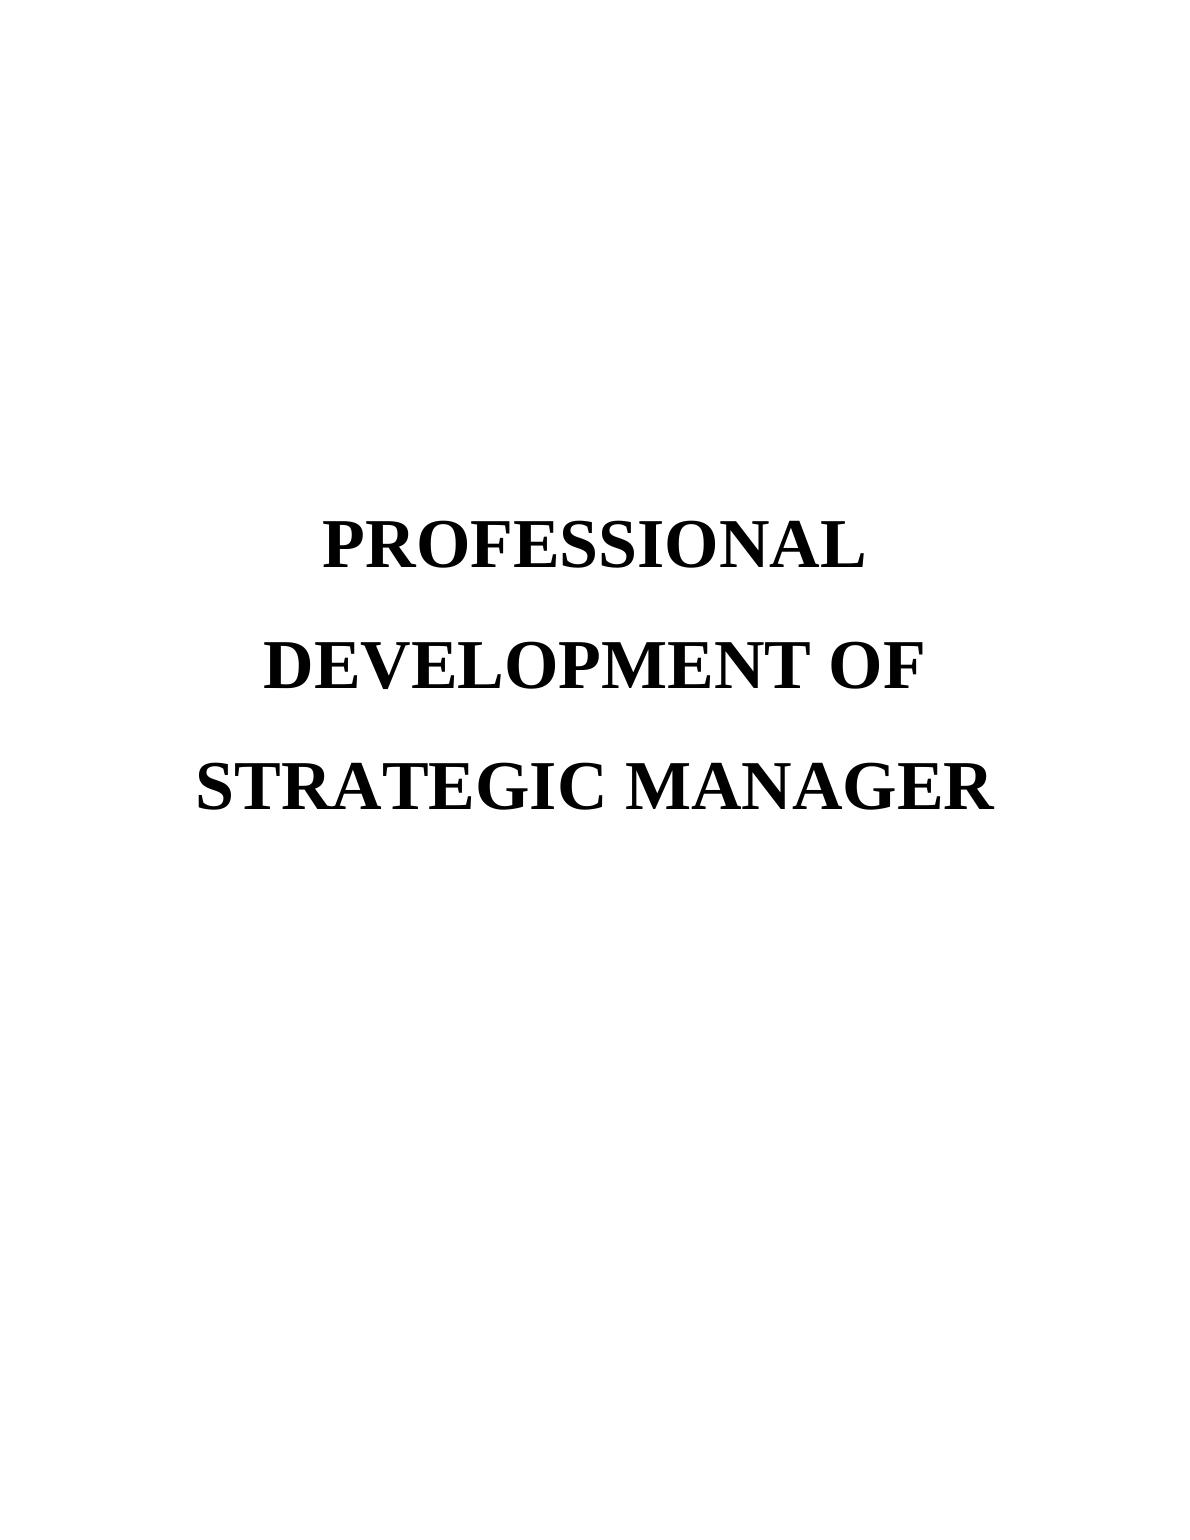 Report On Professional Development Of Strategic Manager_1